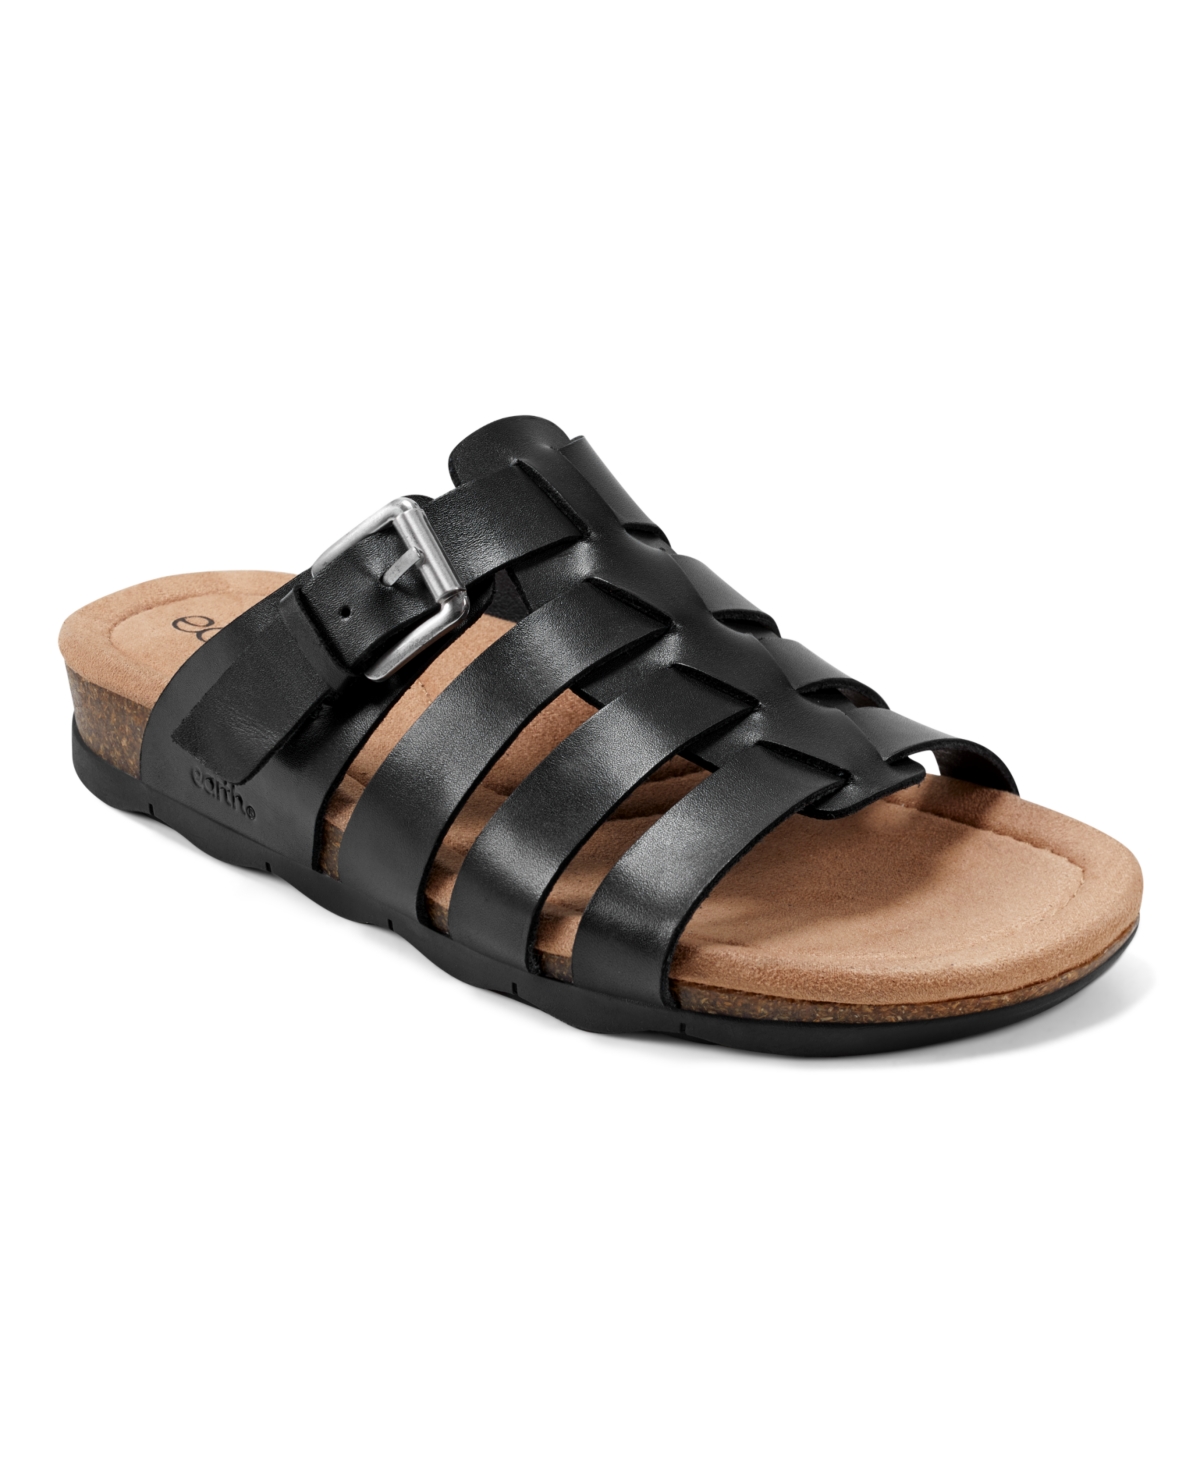 Earth Women's Eresa Slip-On Strappy Flat Casual Sandals - Black Leather